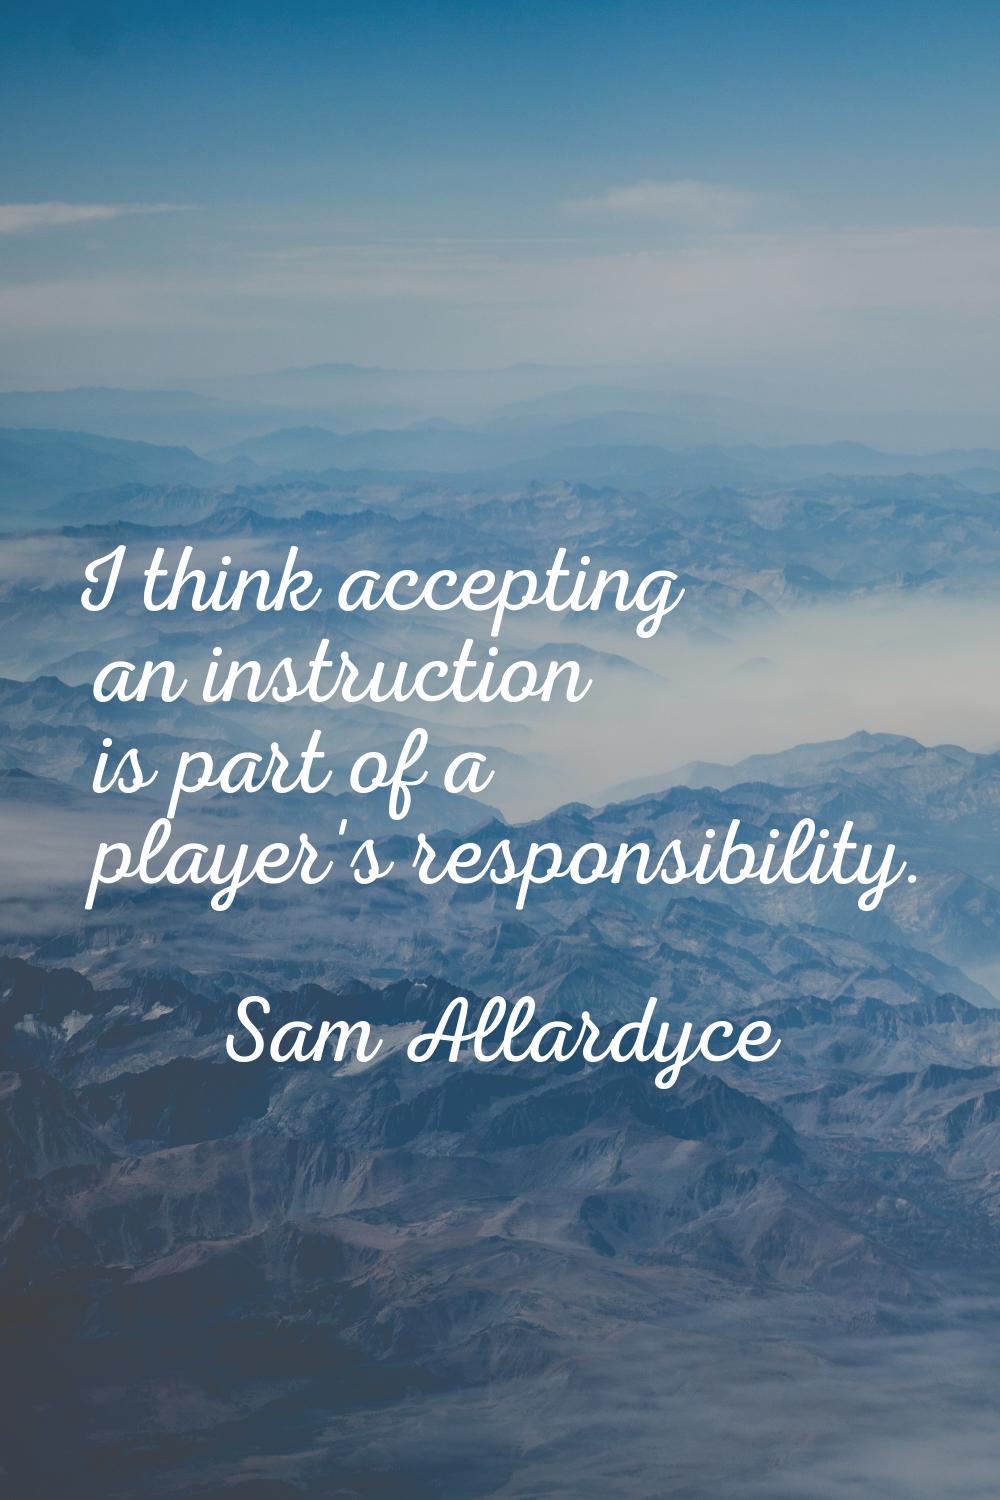 I think accepting an instruction is part of a player's responsibility.